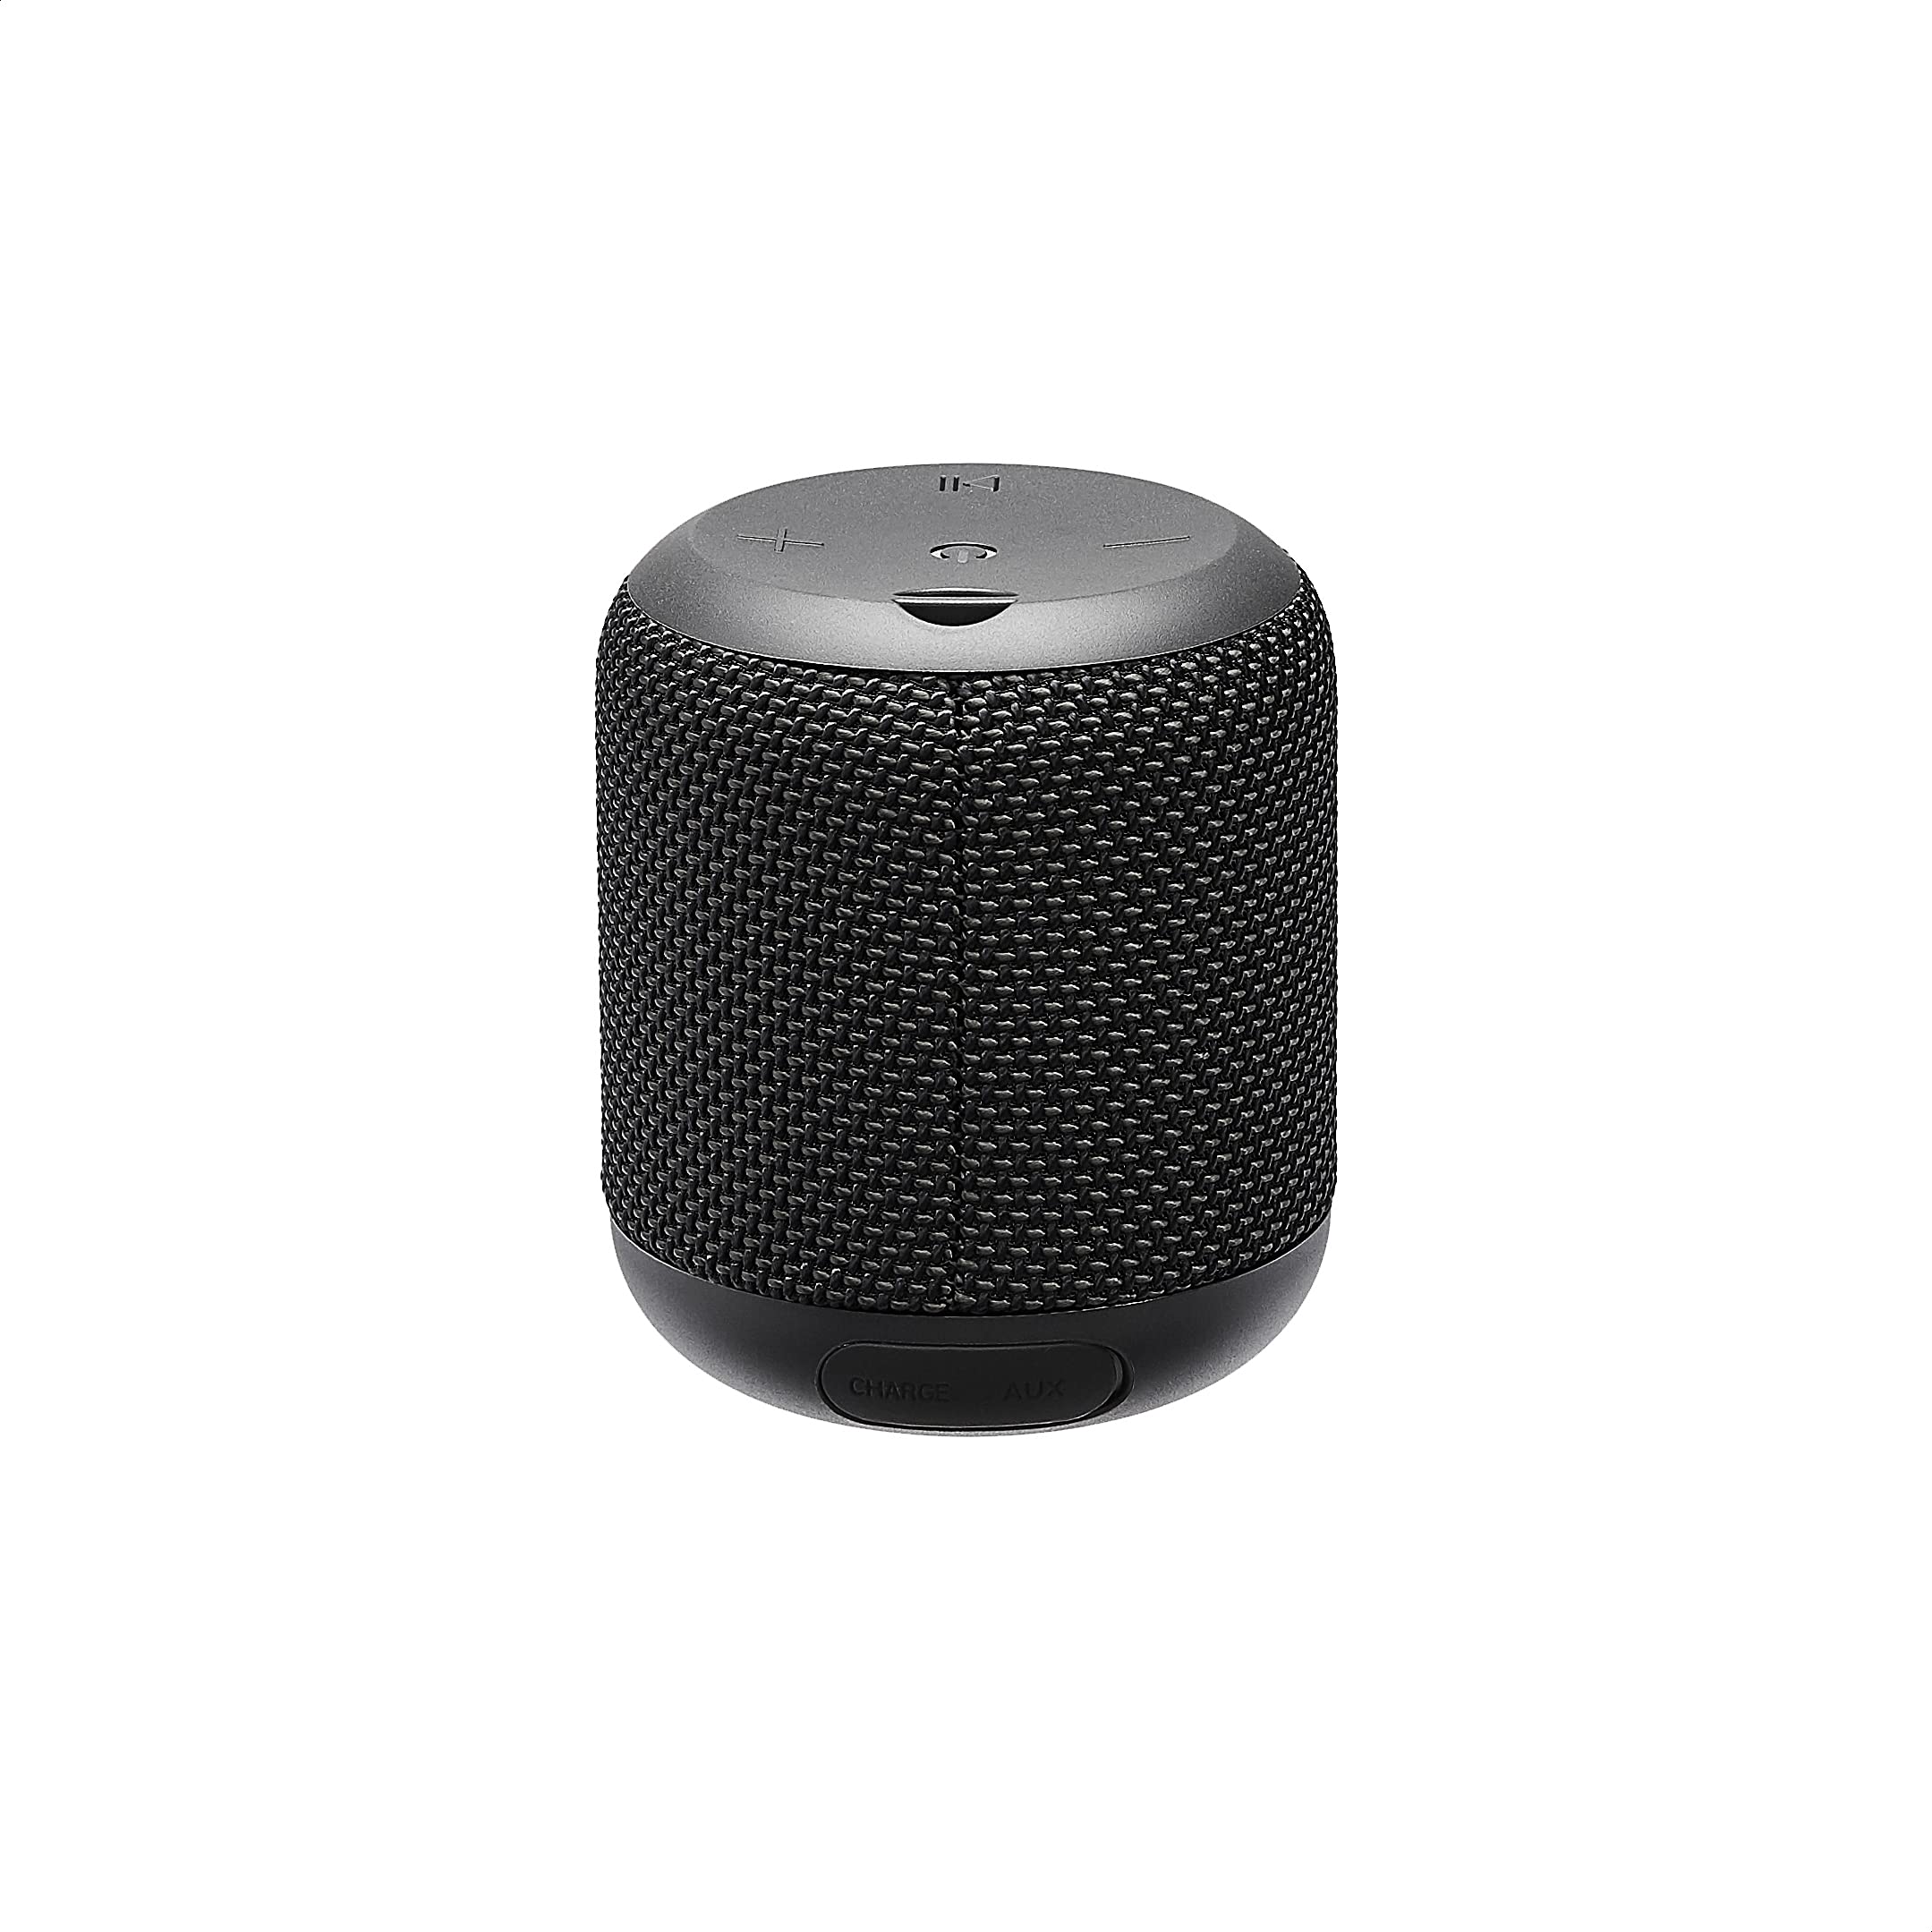 Eono by Amazon - Bluetooth IPX5 Waterproof Speaker with HARMAN Sound Technology, 9 Hours of Playtime, Deep Bass Sound, Siri and Google Compatible, Built-In Microphone